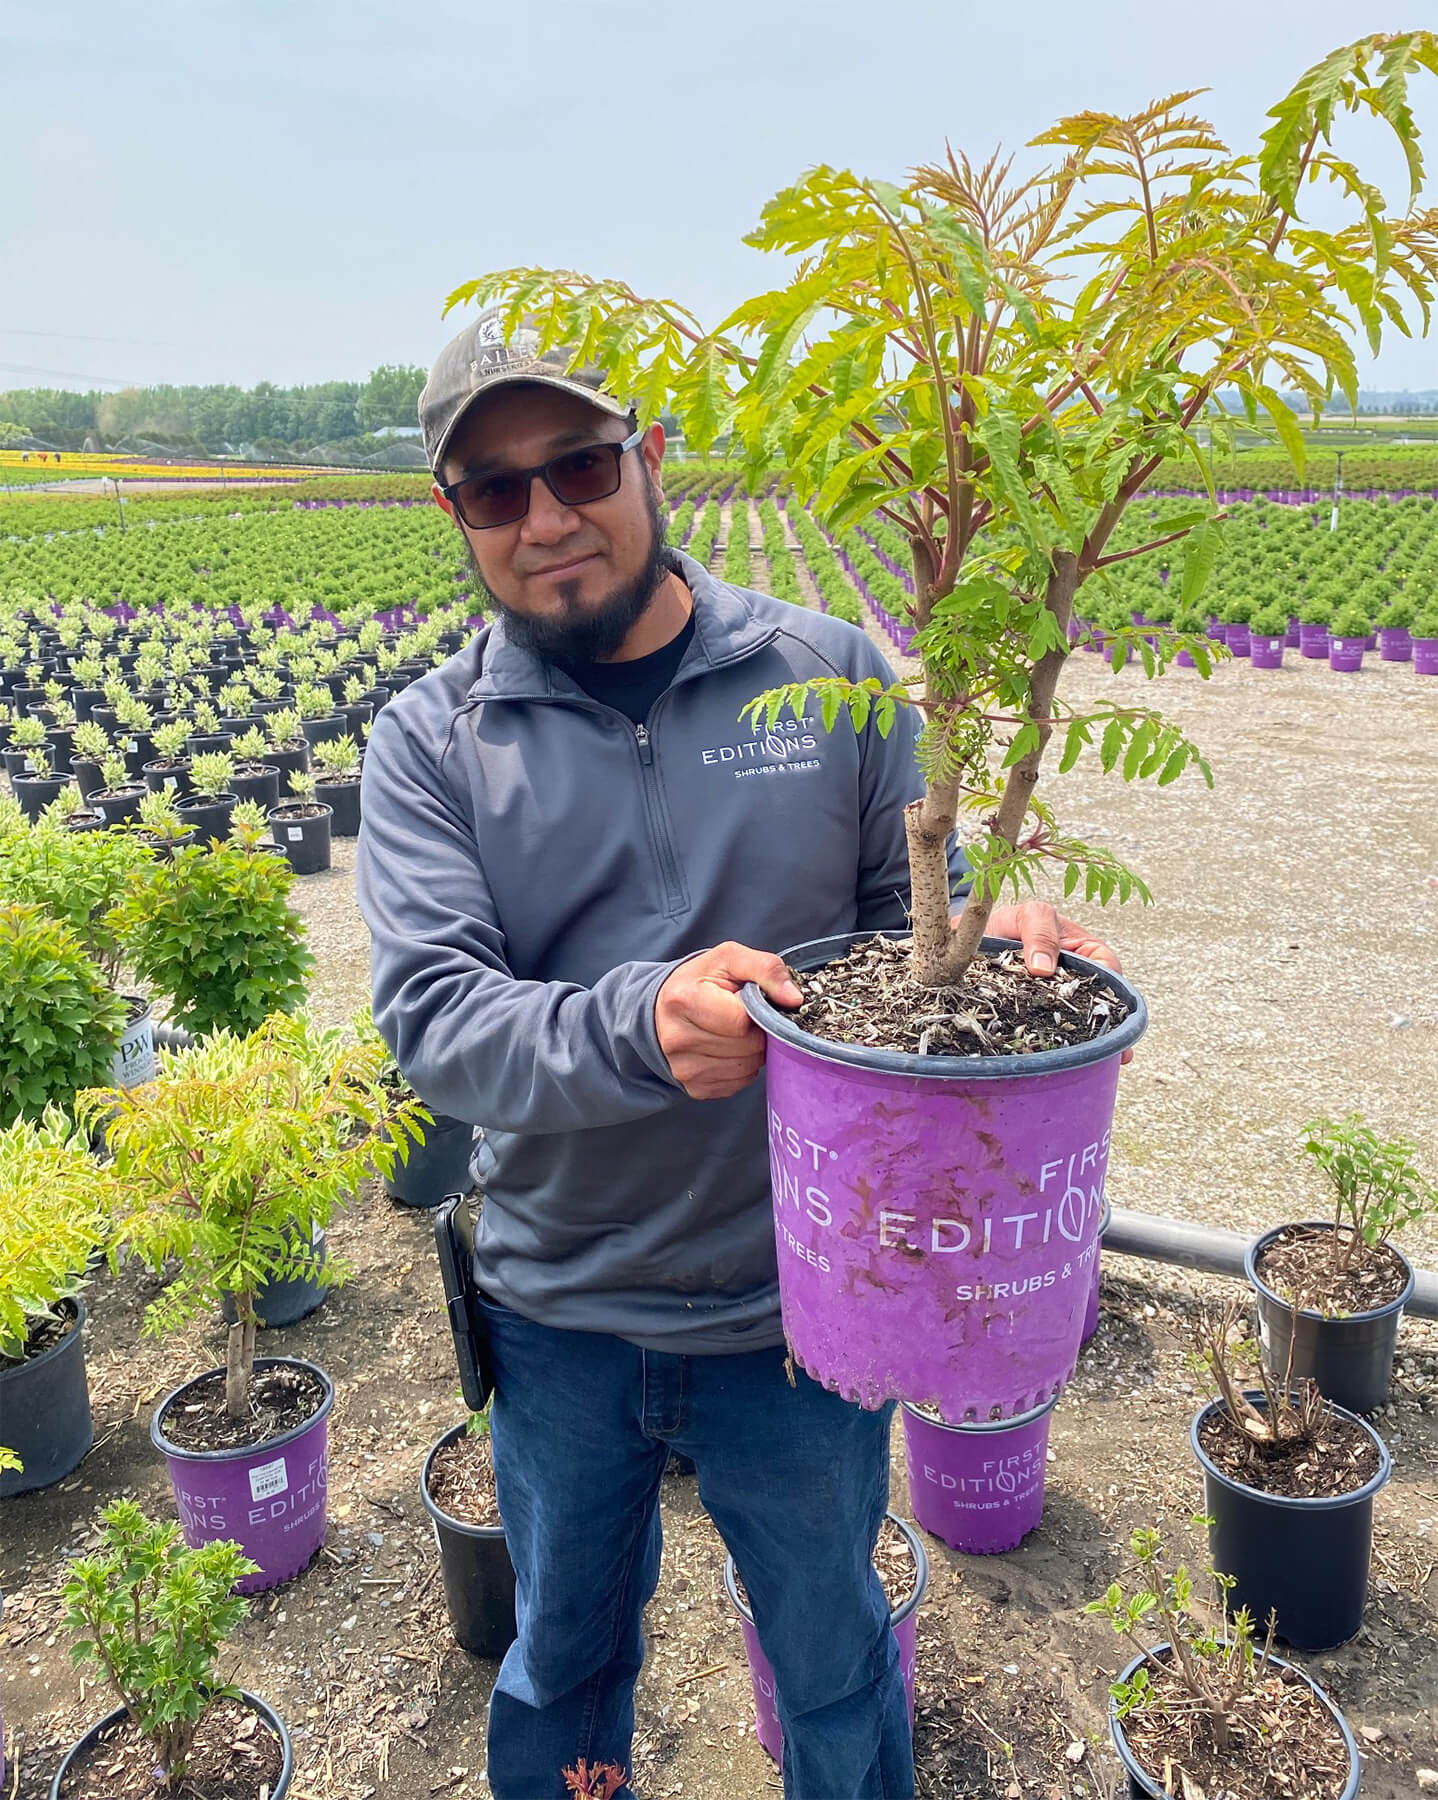 This Tiger Eyes® Sumac was pruned before planting and has multiple strong stems